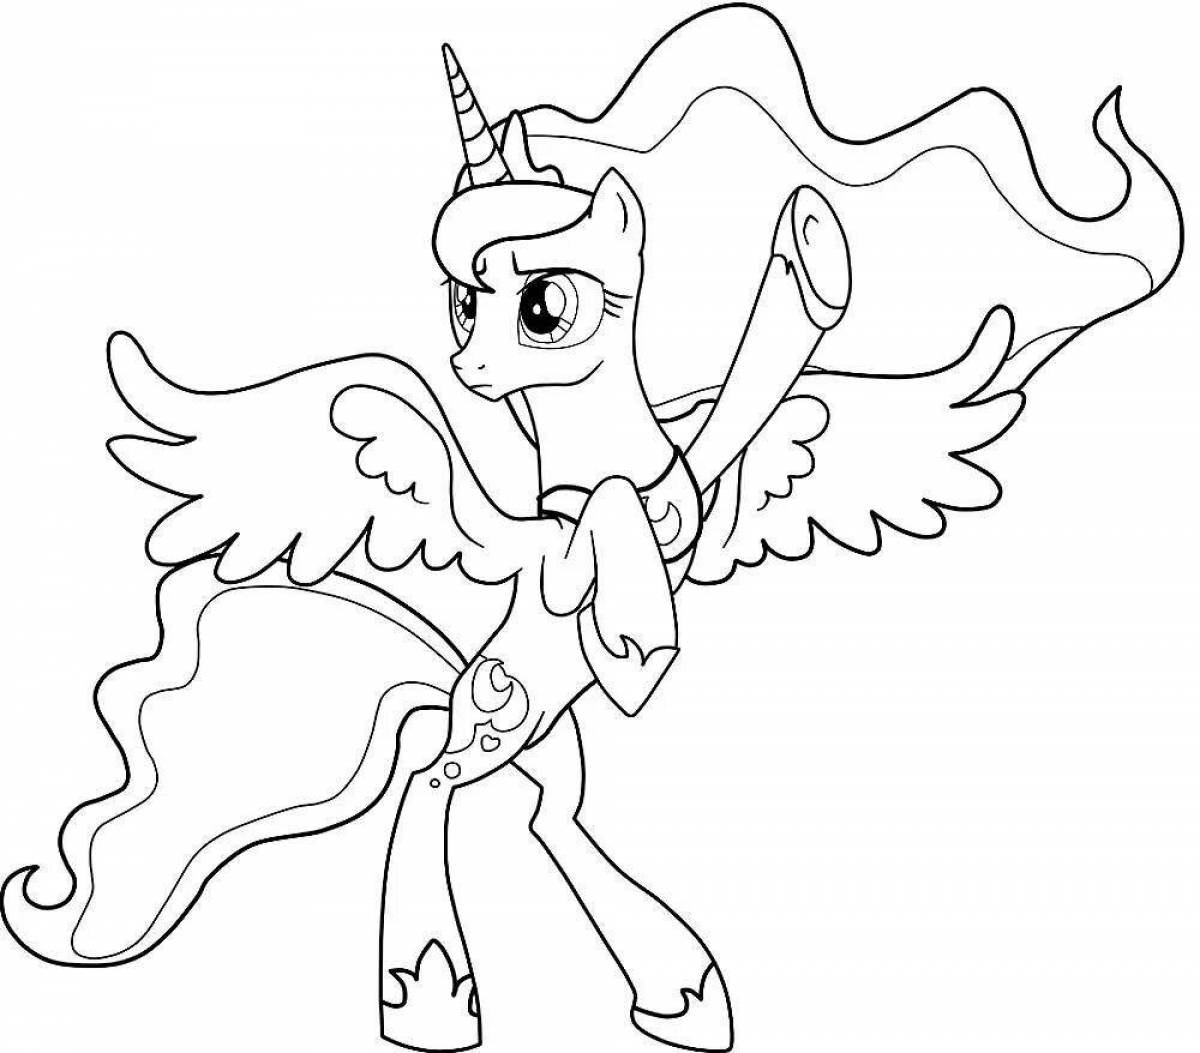 Willie pony coloring book